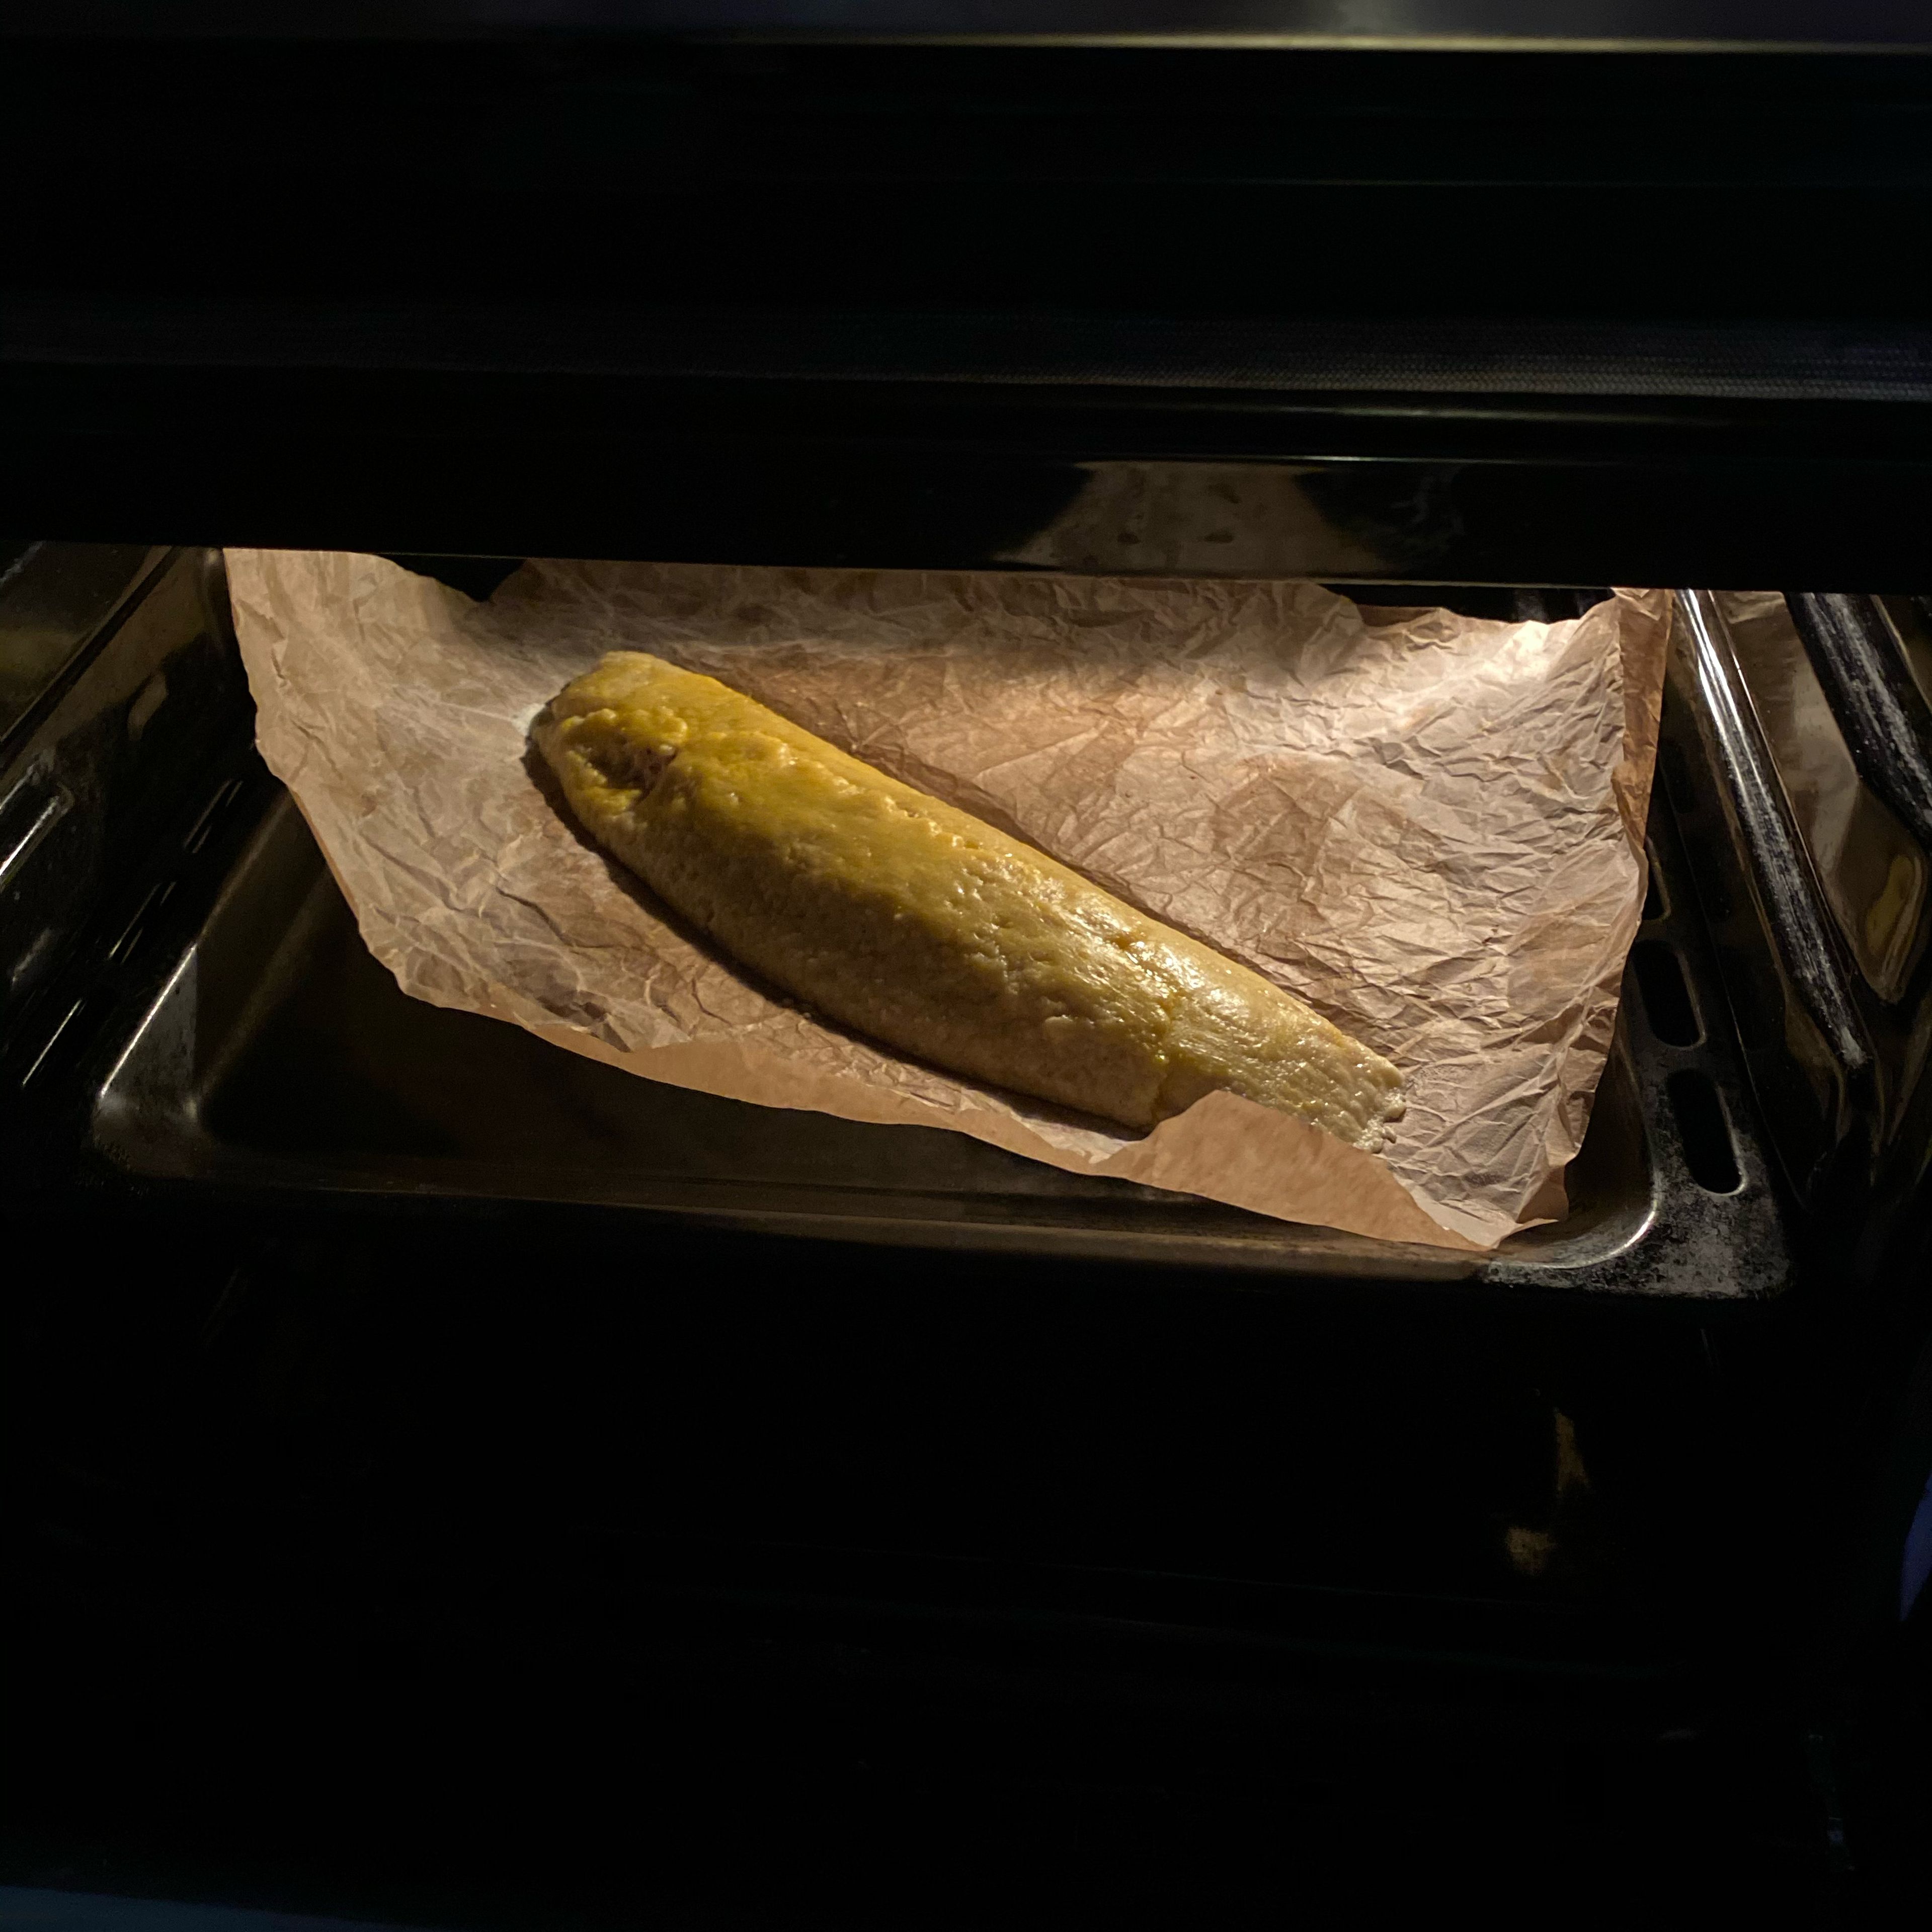 Bake it in the oven for 10-15 min.